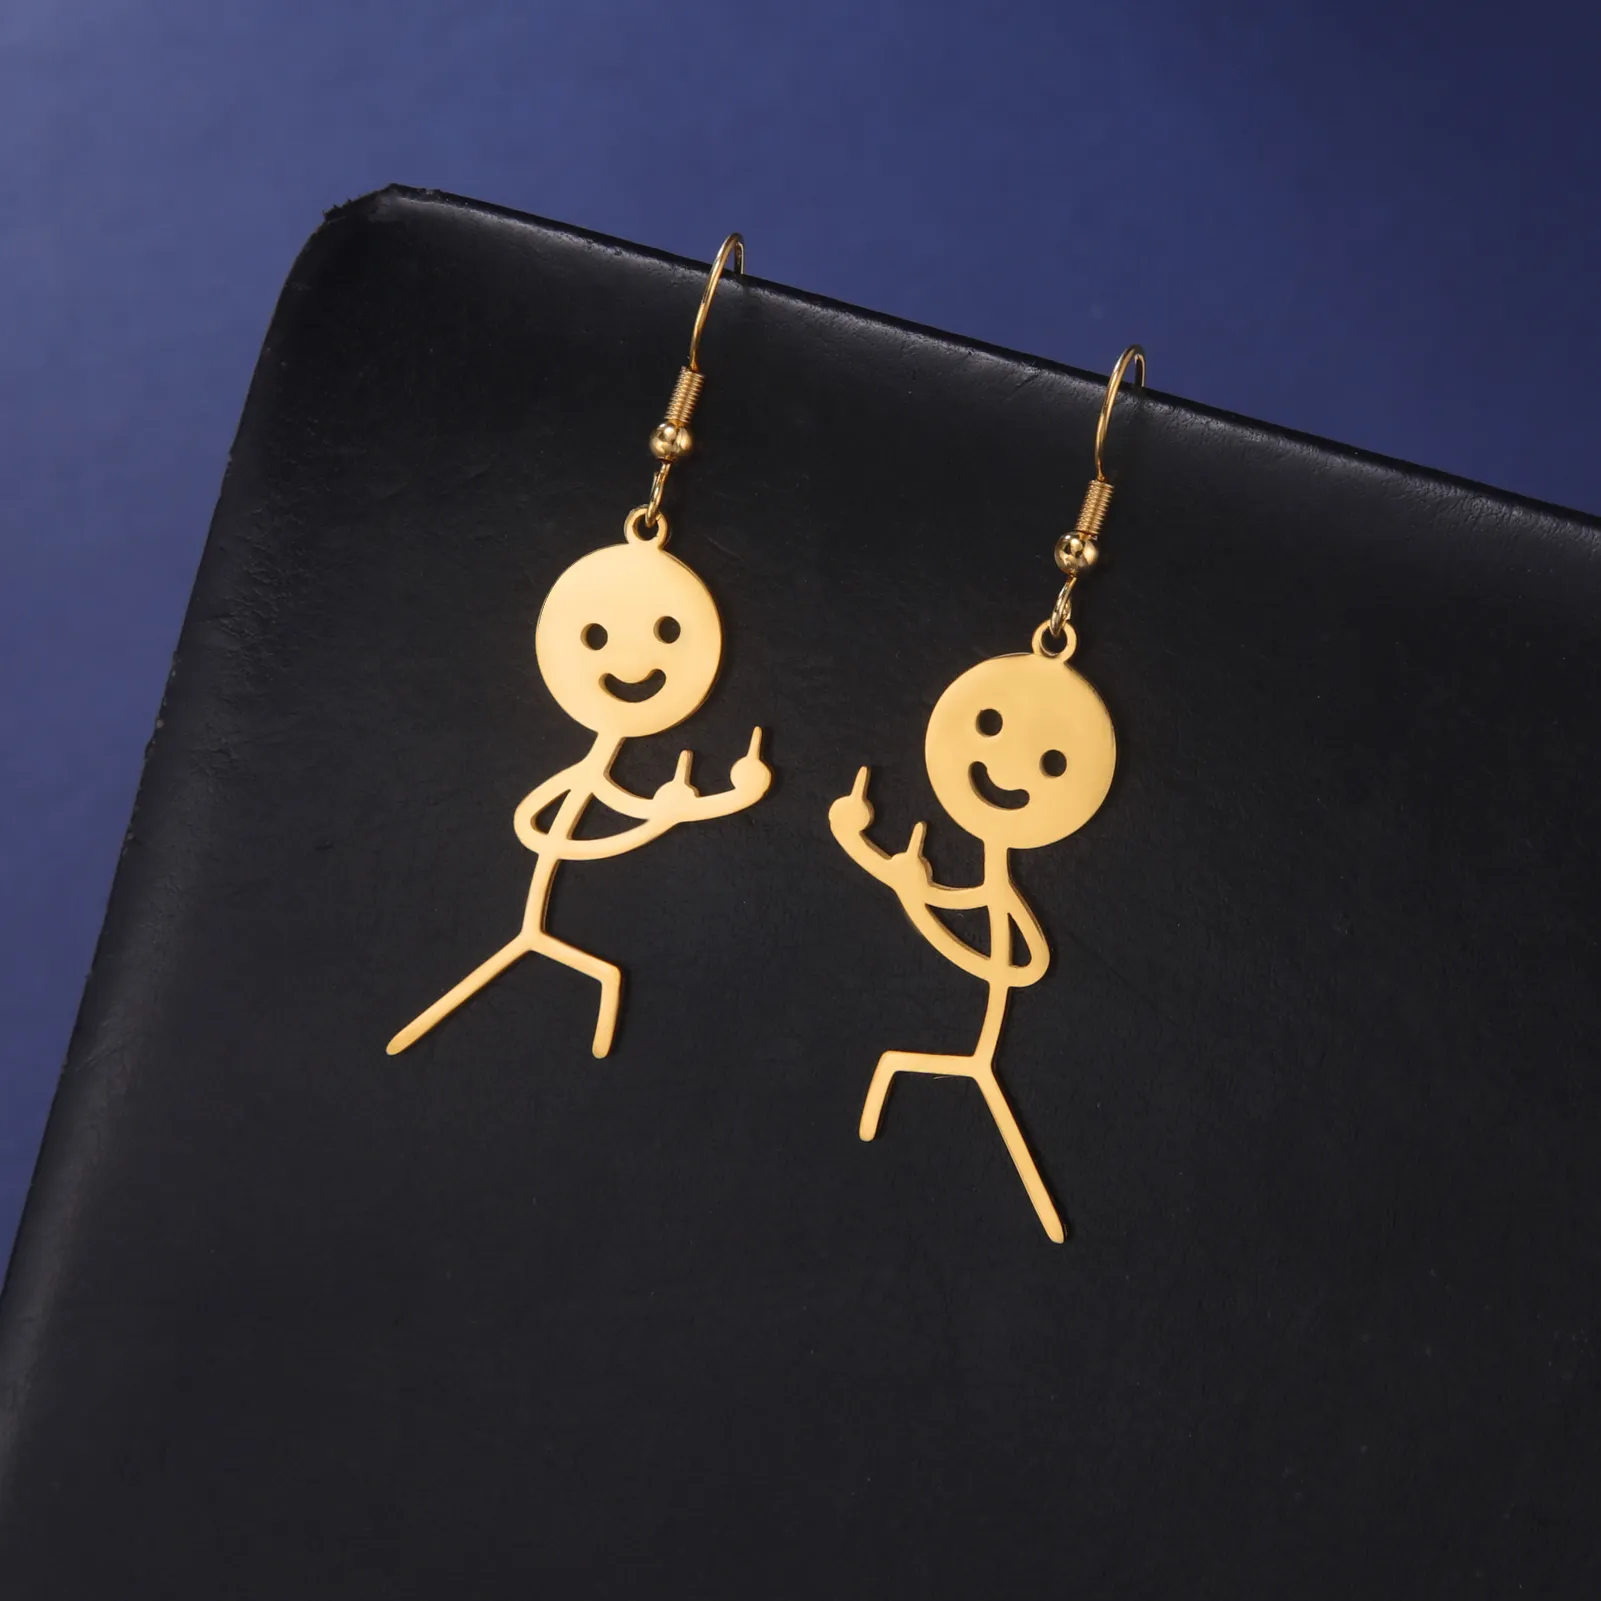 Middle Finger Stickman Pendant || Mens Jewelry Necklace – Get Laid Already